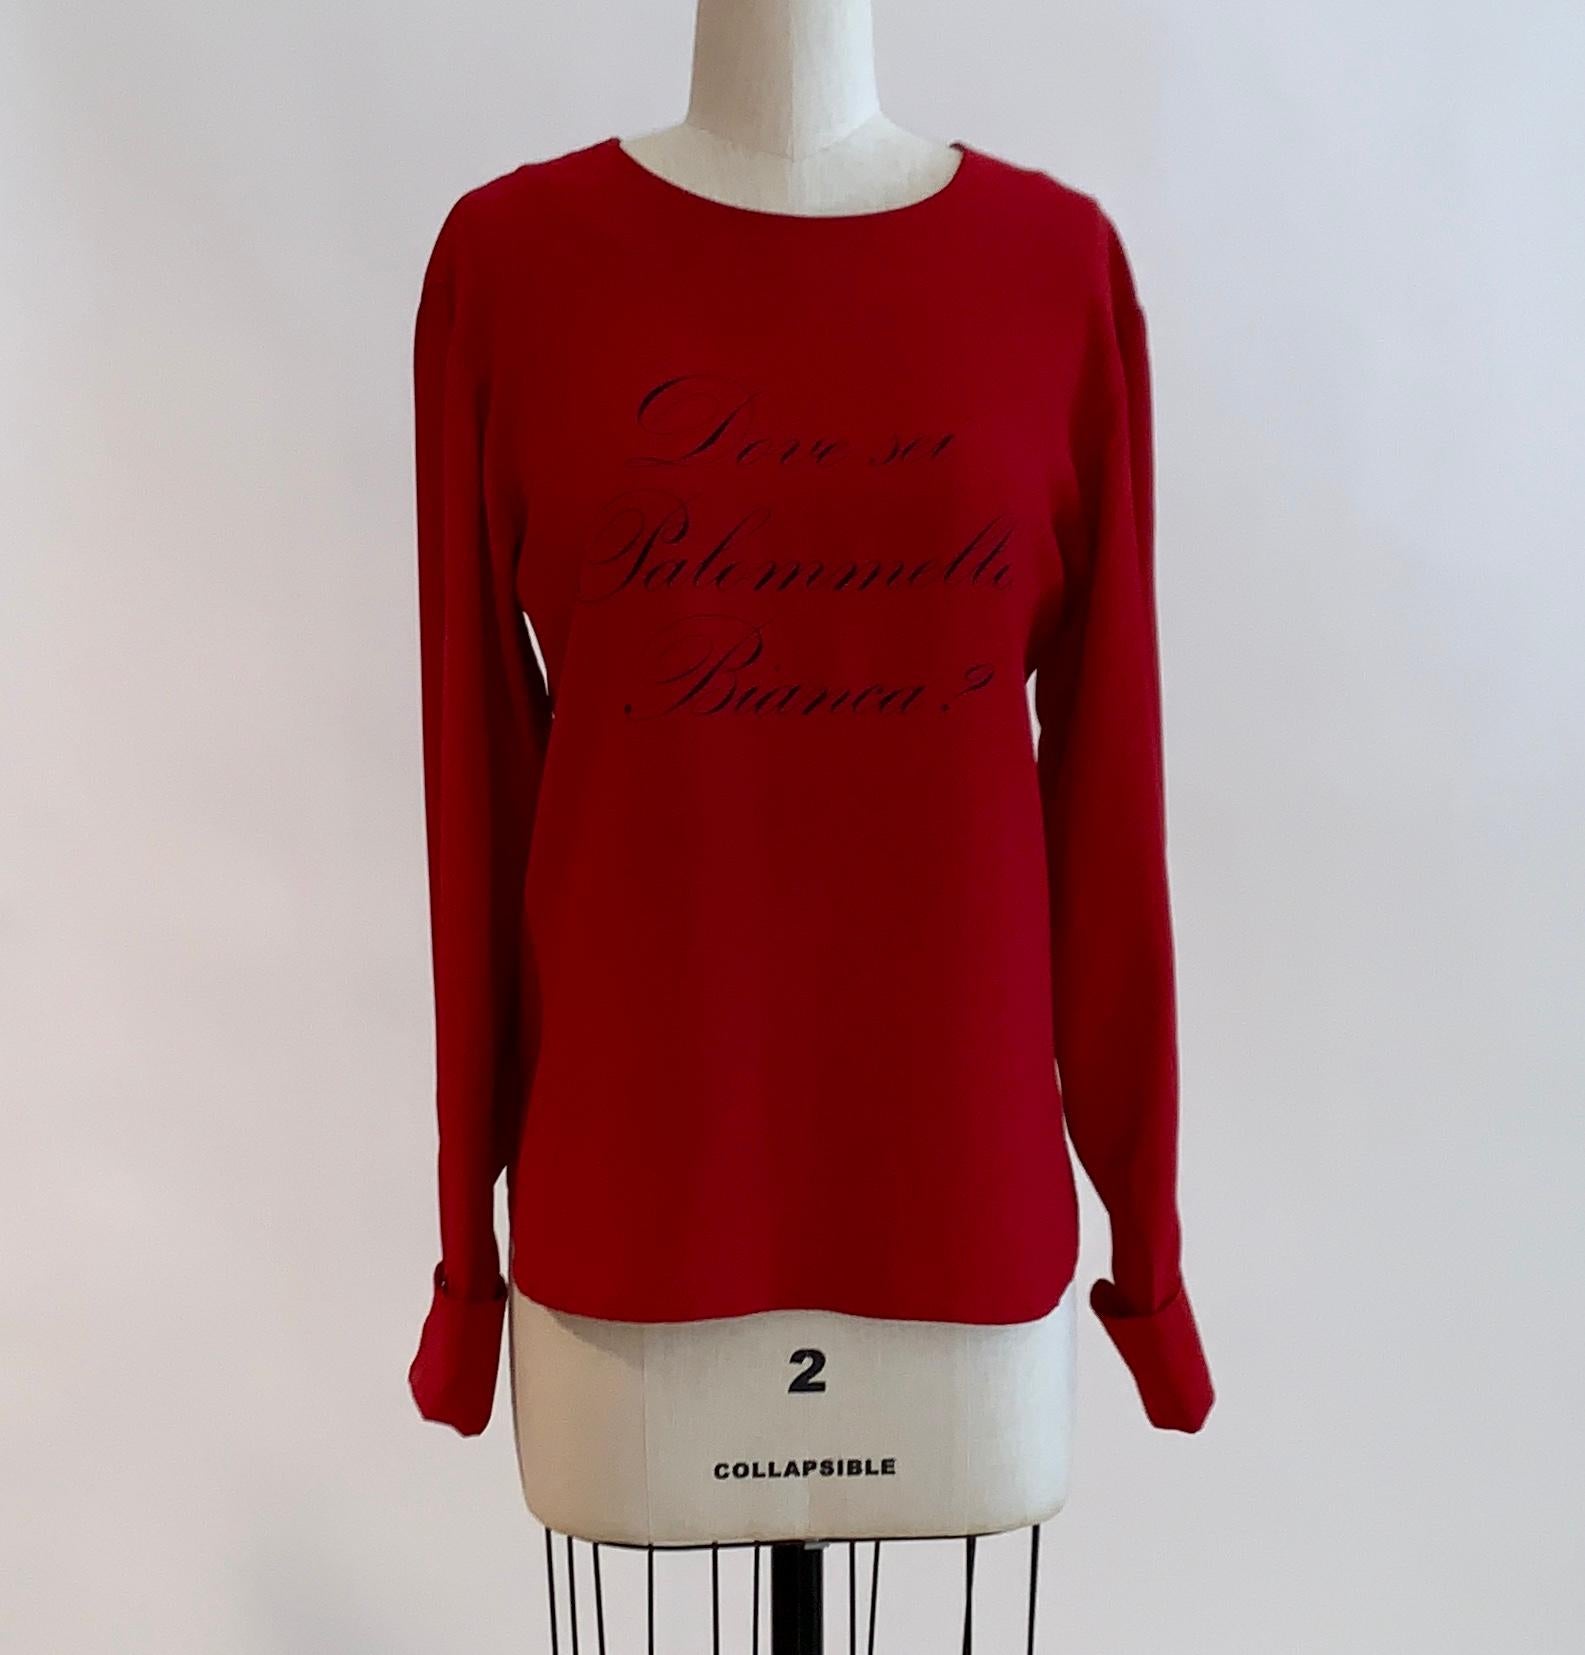 Moschino Couture vintage 1980s long sleeved red blouse reading 